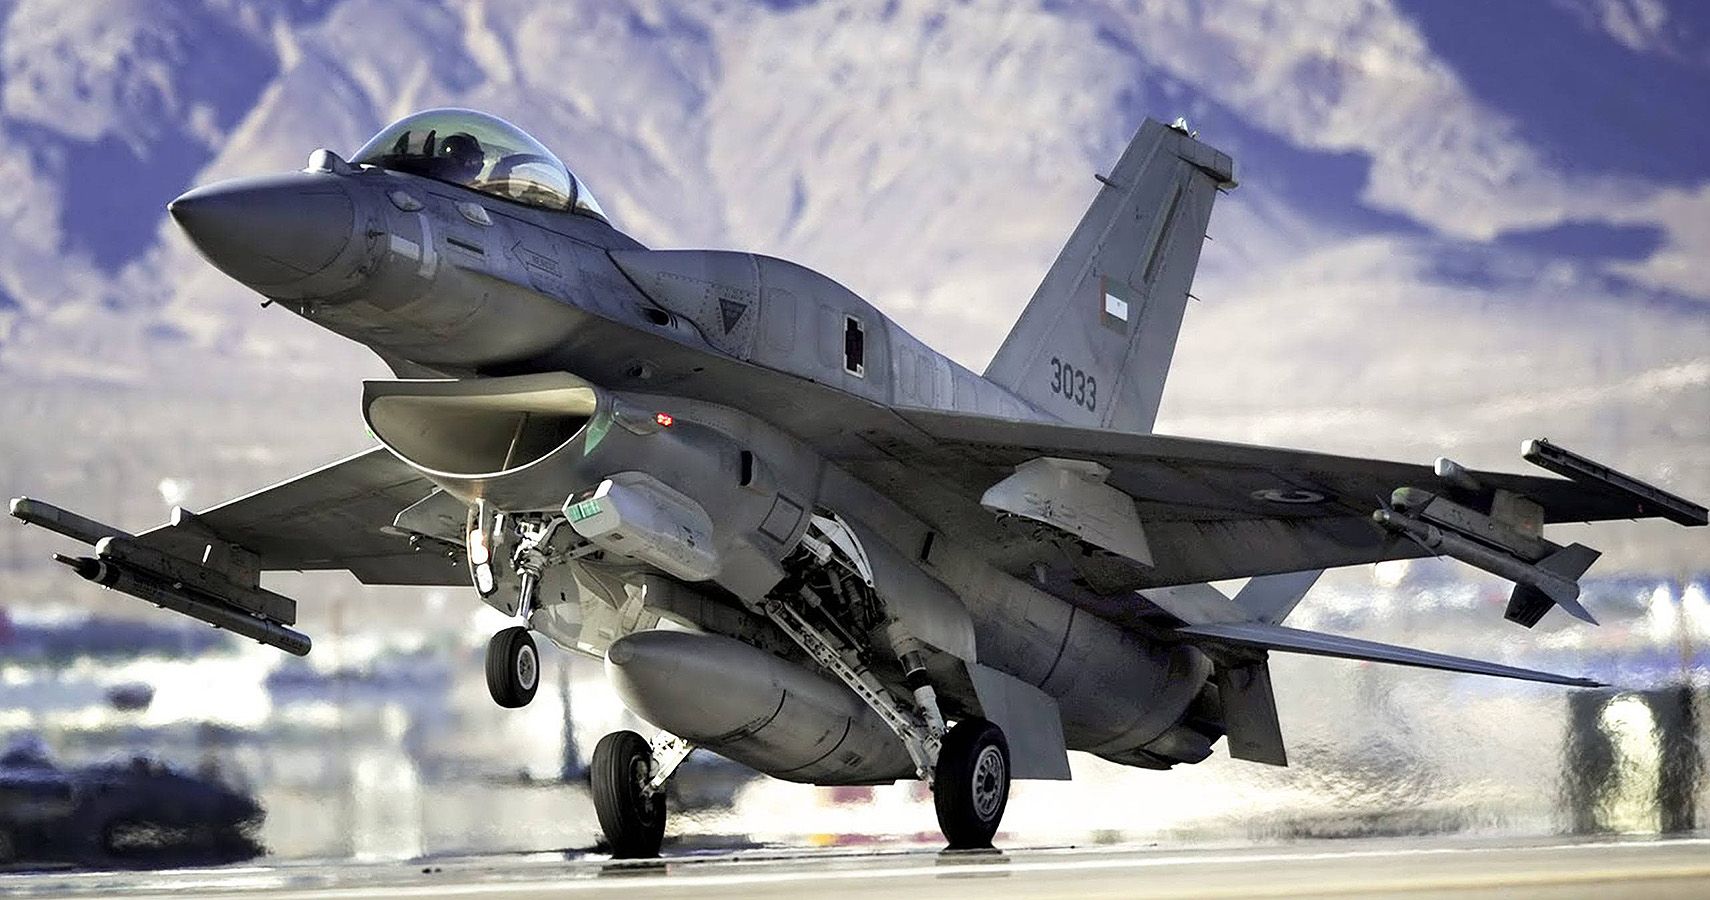 Want To Buy An F-16? The 1980 F-16 On Sales By A Florida-Based Company